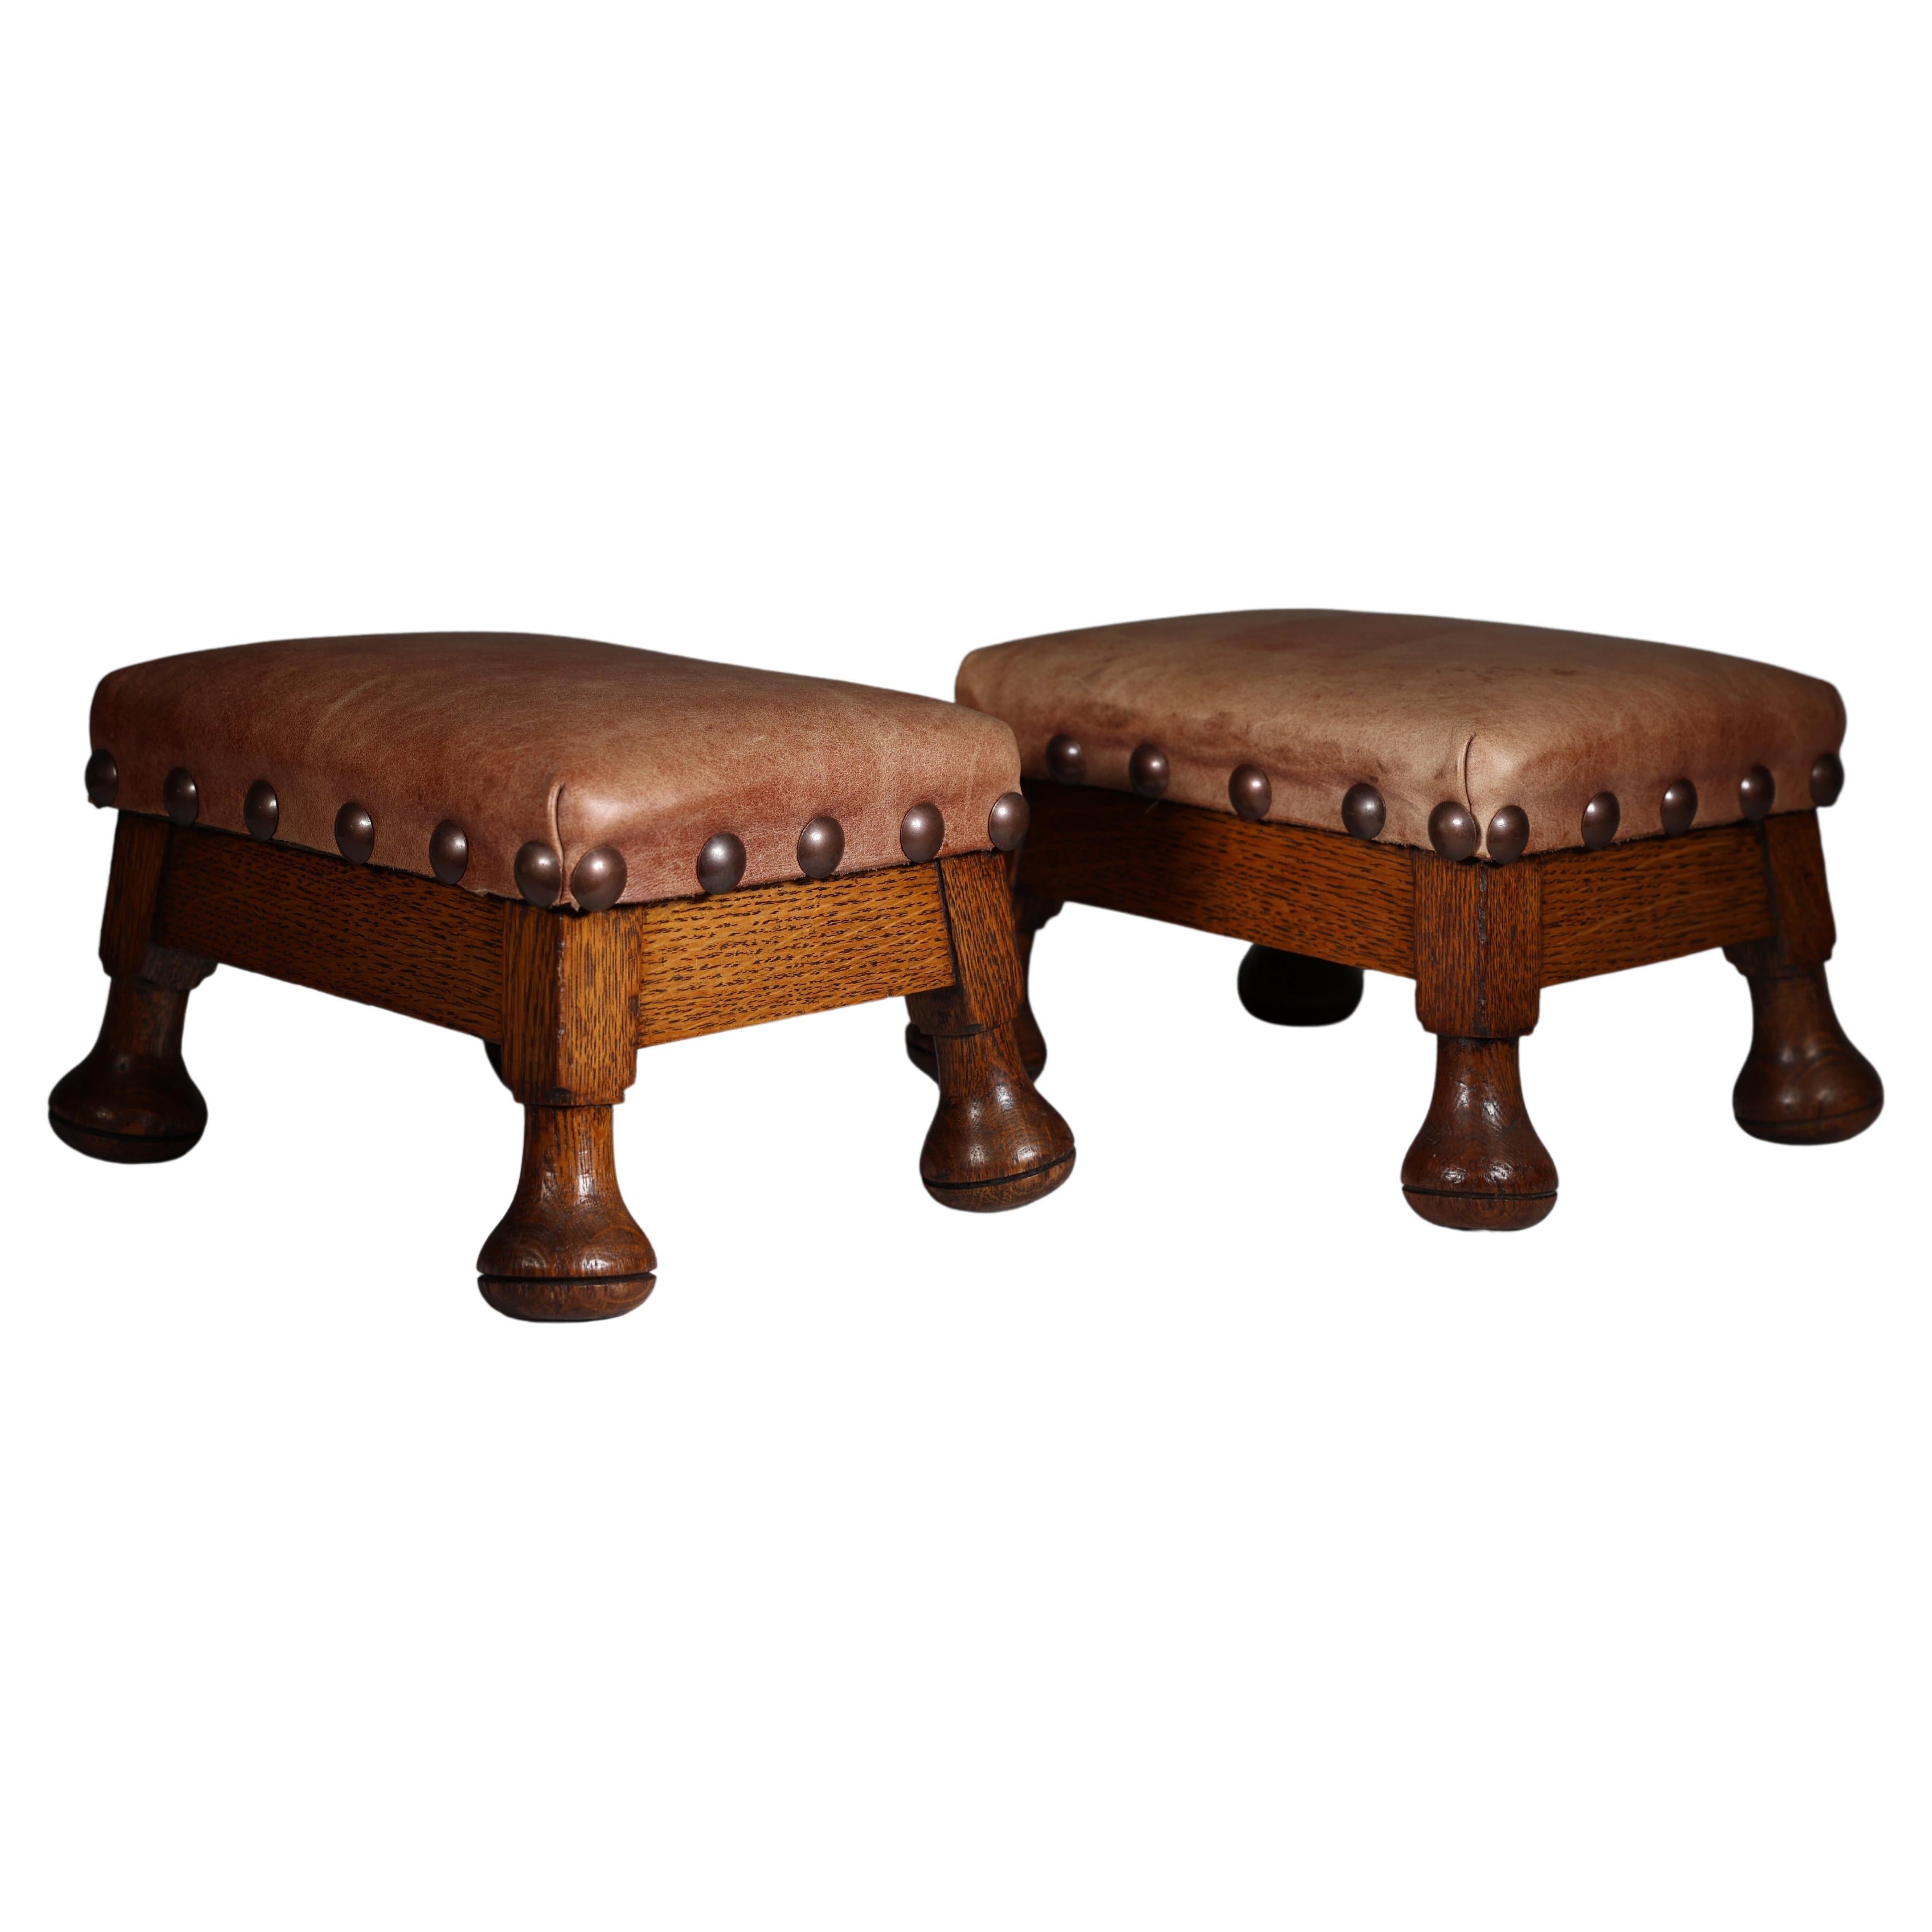 A little pair of Aesthetic Movement oak Thebe stools with leather studded seats